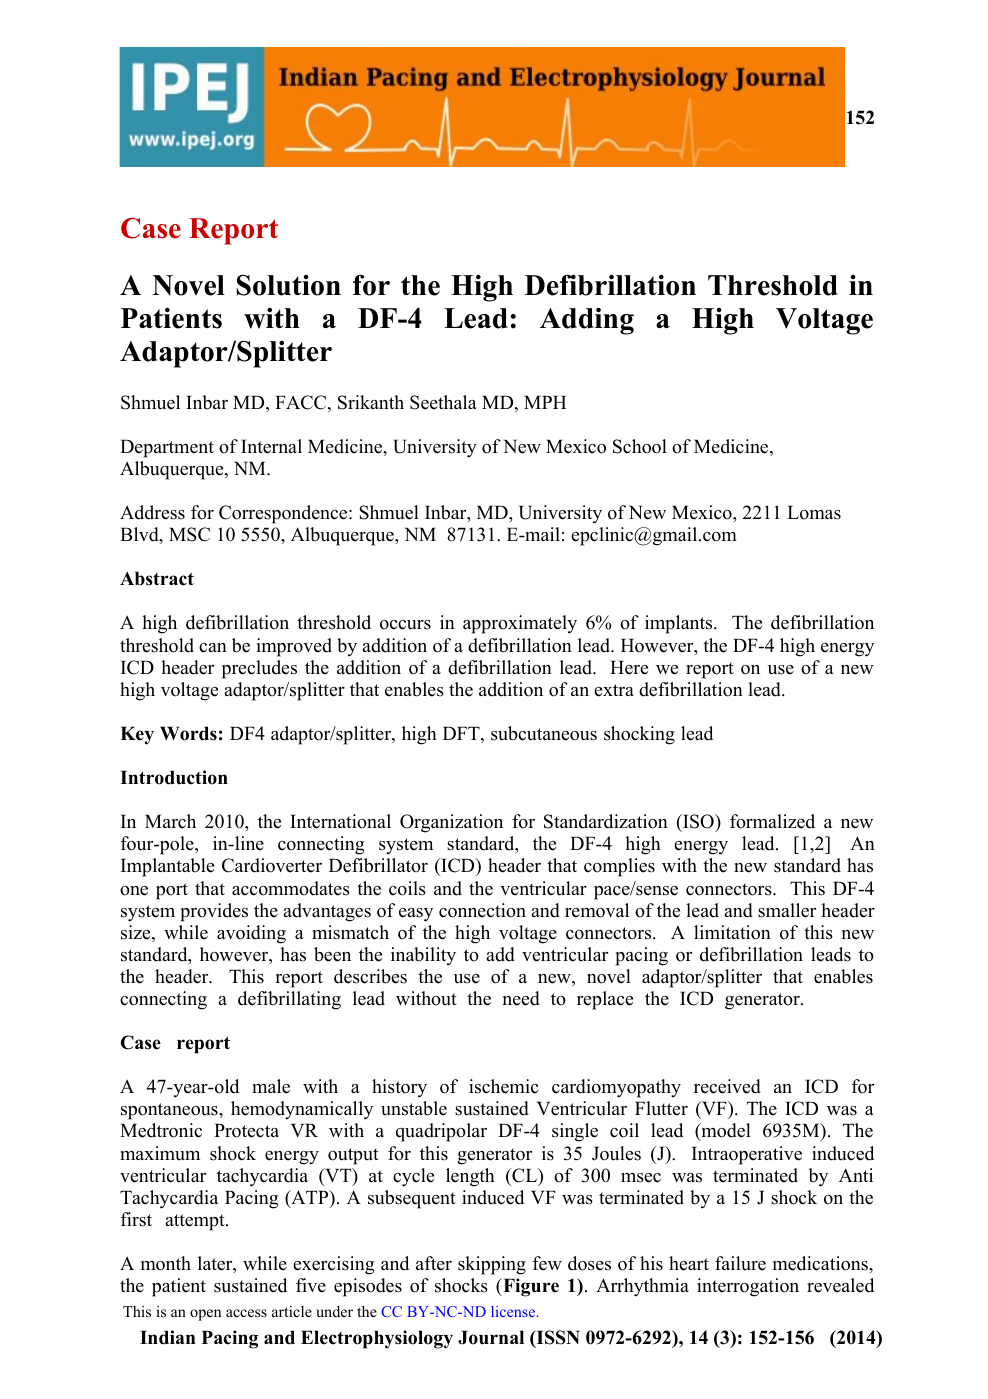 A Novel Solution For The High Defibrillation Threshold In Patients With A Df 4 Lead Adding A High Voltage Adaptor Splitter Topic Of Research Paper In Clinical Medicine Download Scholarly Article Pdf And